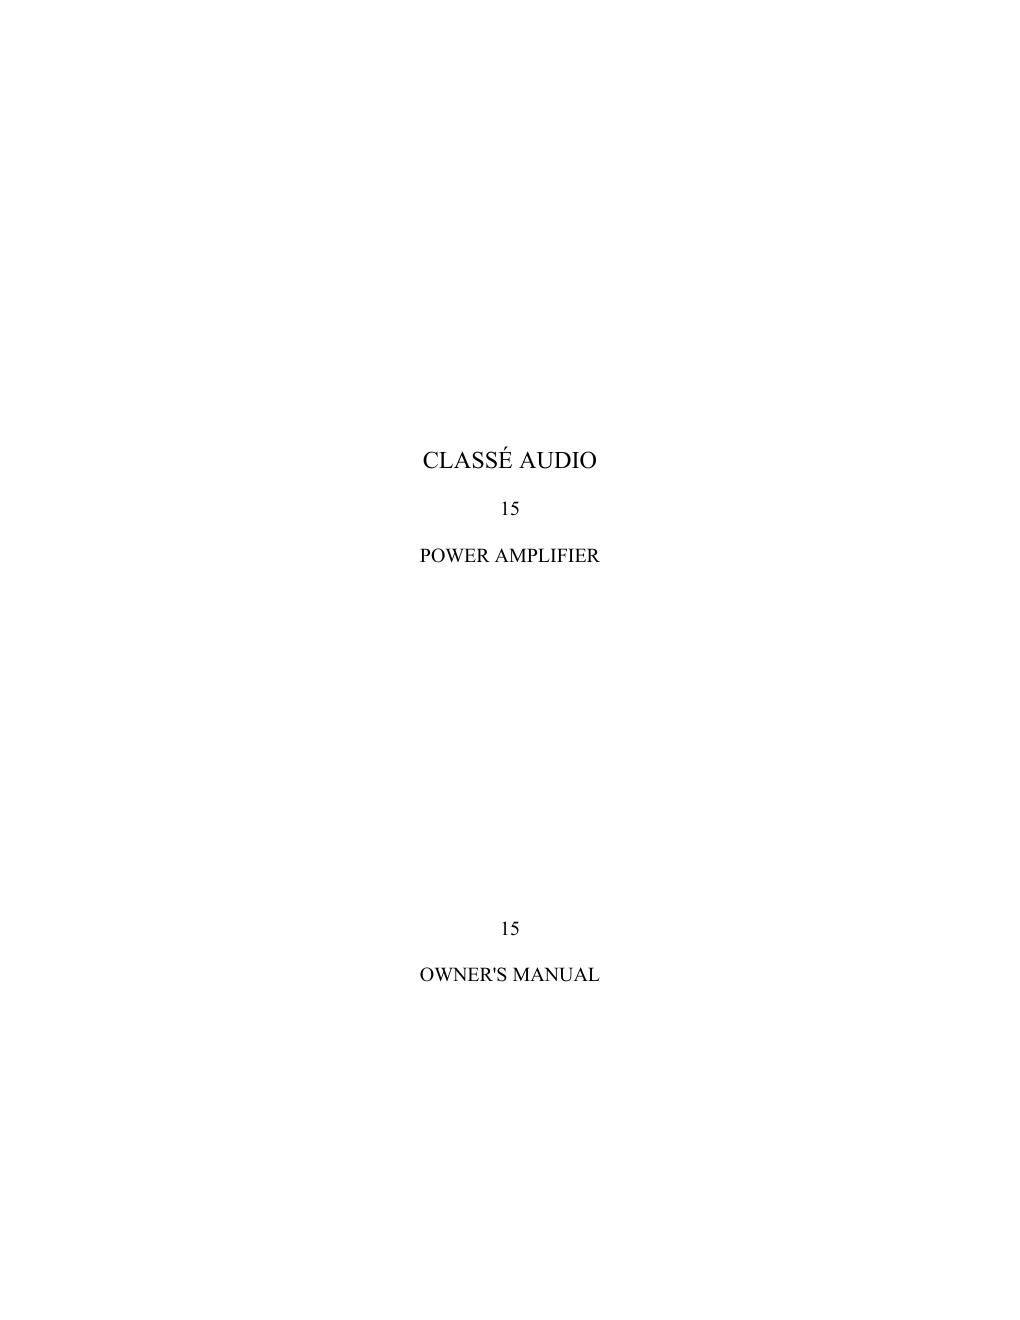 classe audio 15 owners manual